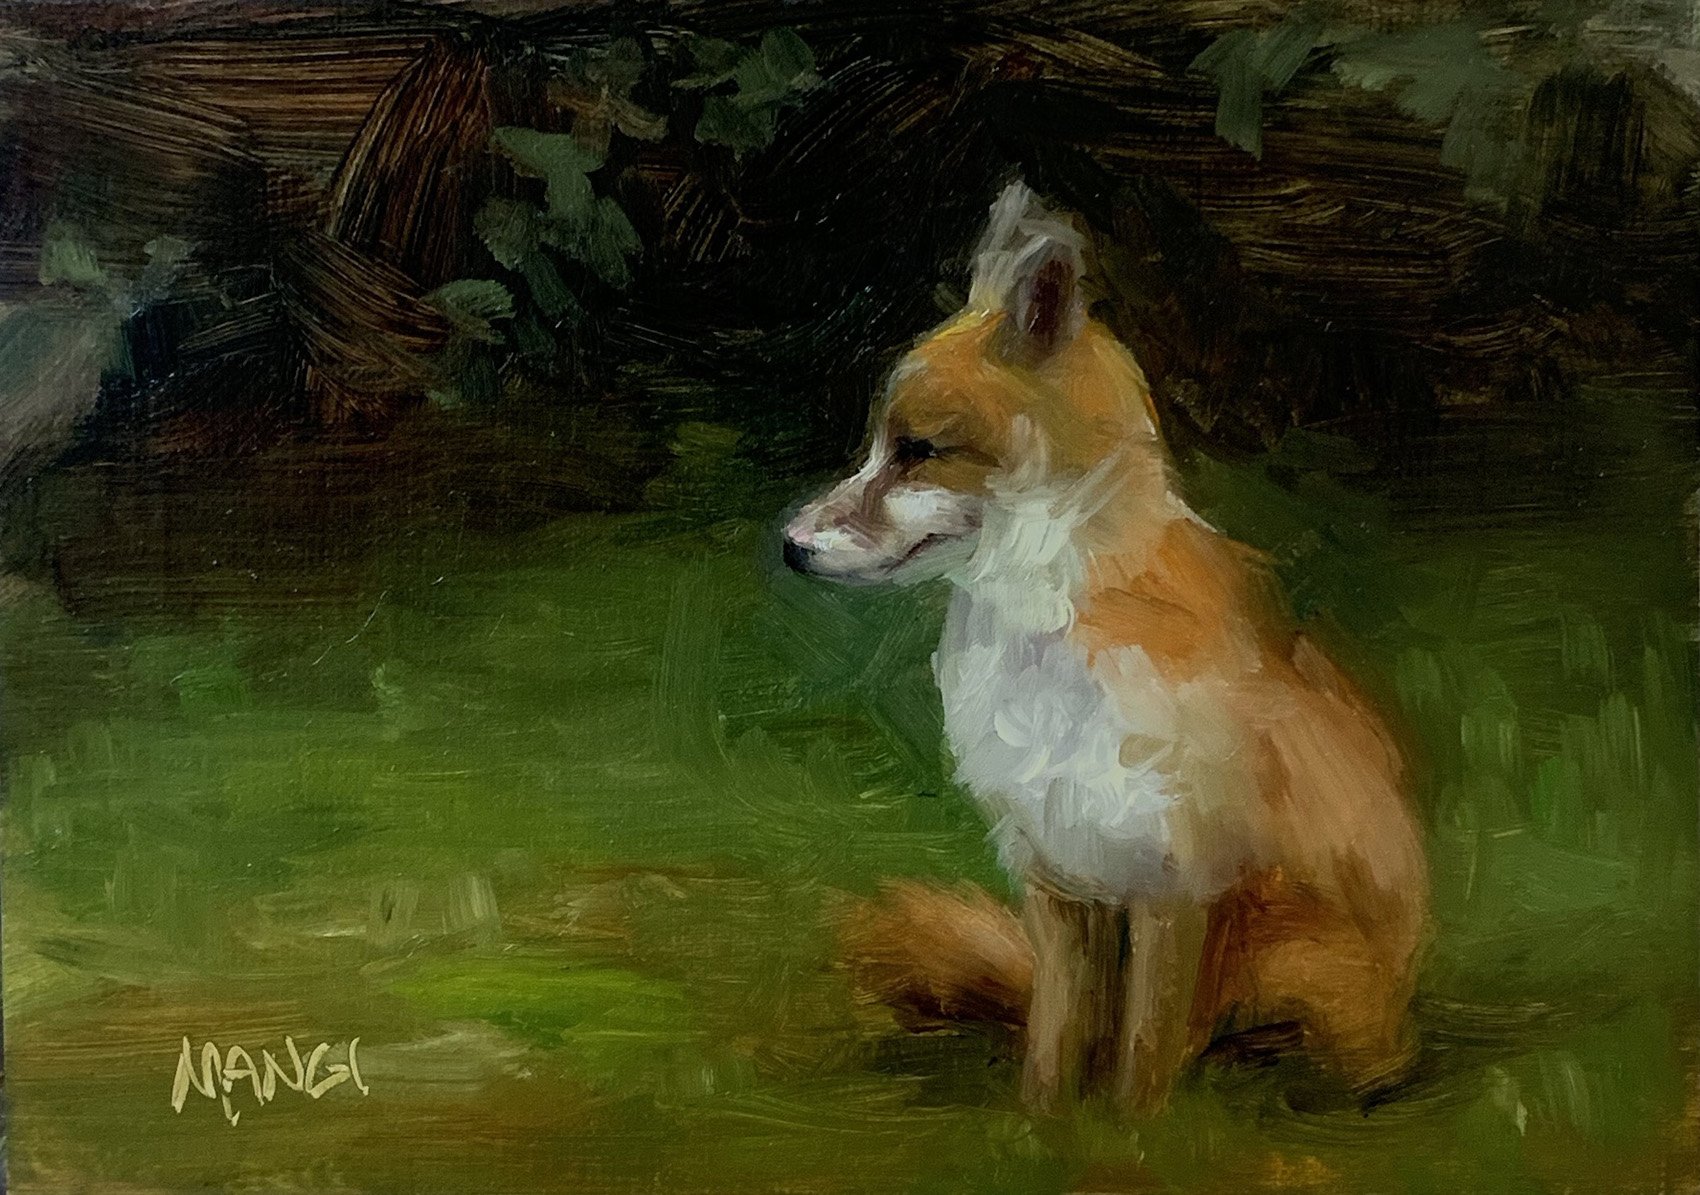 Foxy Encounter © 2022 Johanne Mangi. All Rights Reserved.